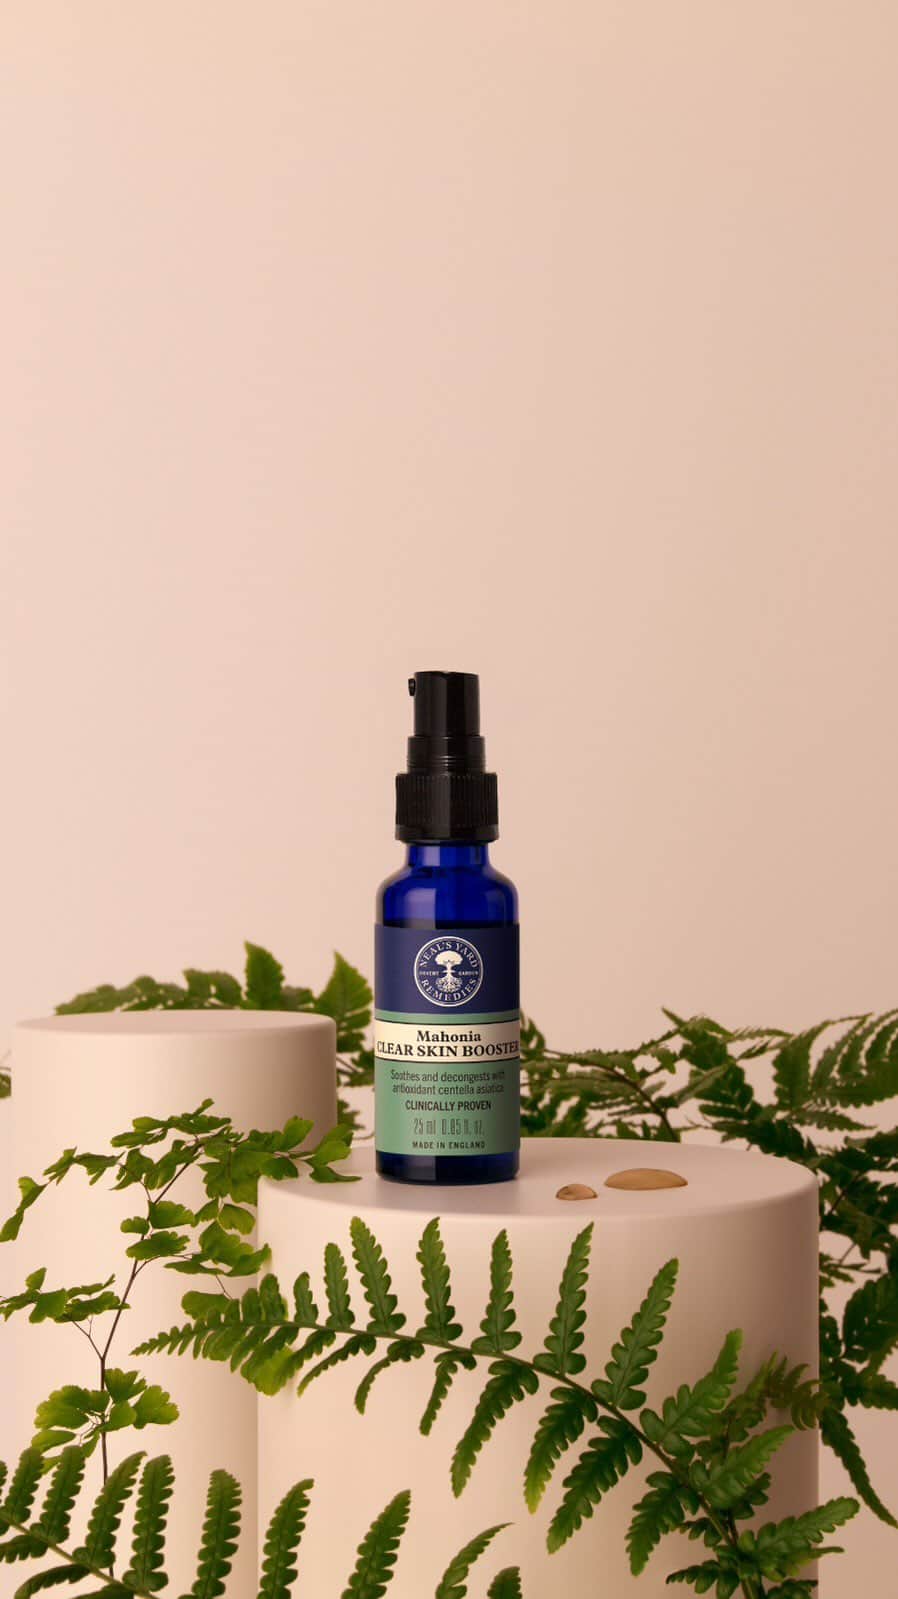 Neal's Yard Remediesのインスタグラム：「🌿 Unveiling our latest masterpiece: the all-new certified organic Mahonia Clear Skin Booster 👀 💦⁠ ⁠ This unique, powerful formula is designed to bring clarity, balance, and purification to your skin. It features centella asiatica to tackle congestion and unclog pores, as well as the soothing touch of calendula to ease irritation. Our Mahonia Clear Skin Booster is a clinically proven, effective treatment to target blemishes, and helps to decongest skin with the natural skin-clearing and antibacterial properties of Mahonia. ⁠ ⁠ And guess what? 83% agree their complexion looked clearer after 4 weeks* – your complexion will thank you for the clarity it brings. 🌟⁠ ⁠ How to make the most of it? 👀 Incorporate it seamlessly into your skincare routine by massaging into the face and neck, blend it with your favourite serum or moisturiser, or use it as a targeted treatment on problem areas. ⁠ ⁠ Tap to shop.⁠ ⁠ *Based on a consumer trial of 70 participants.」